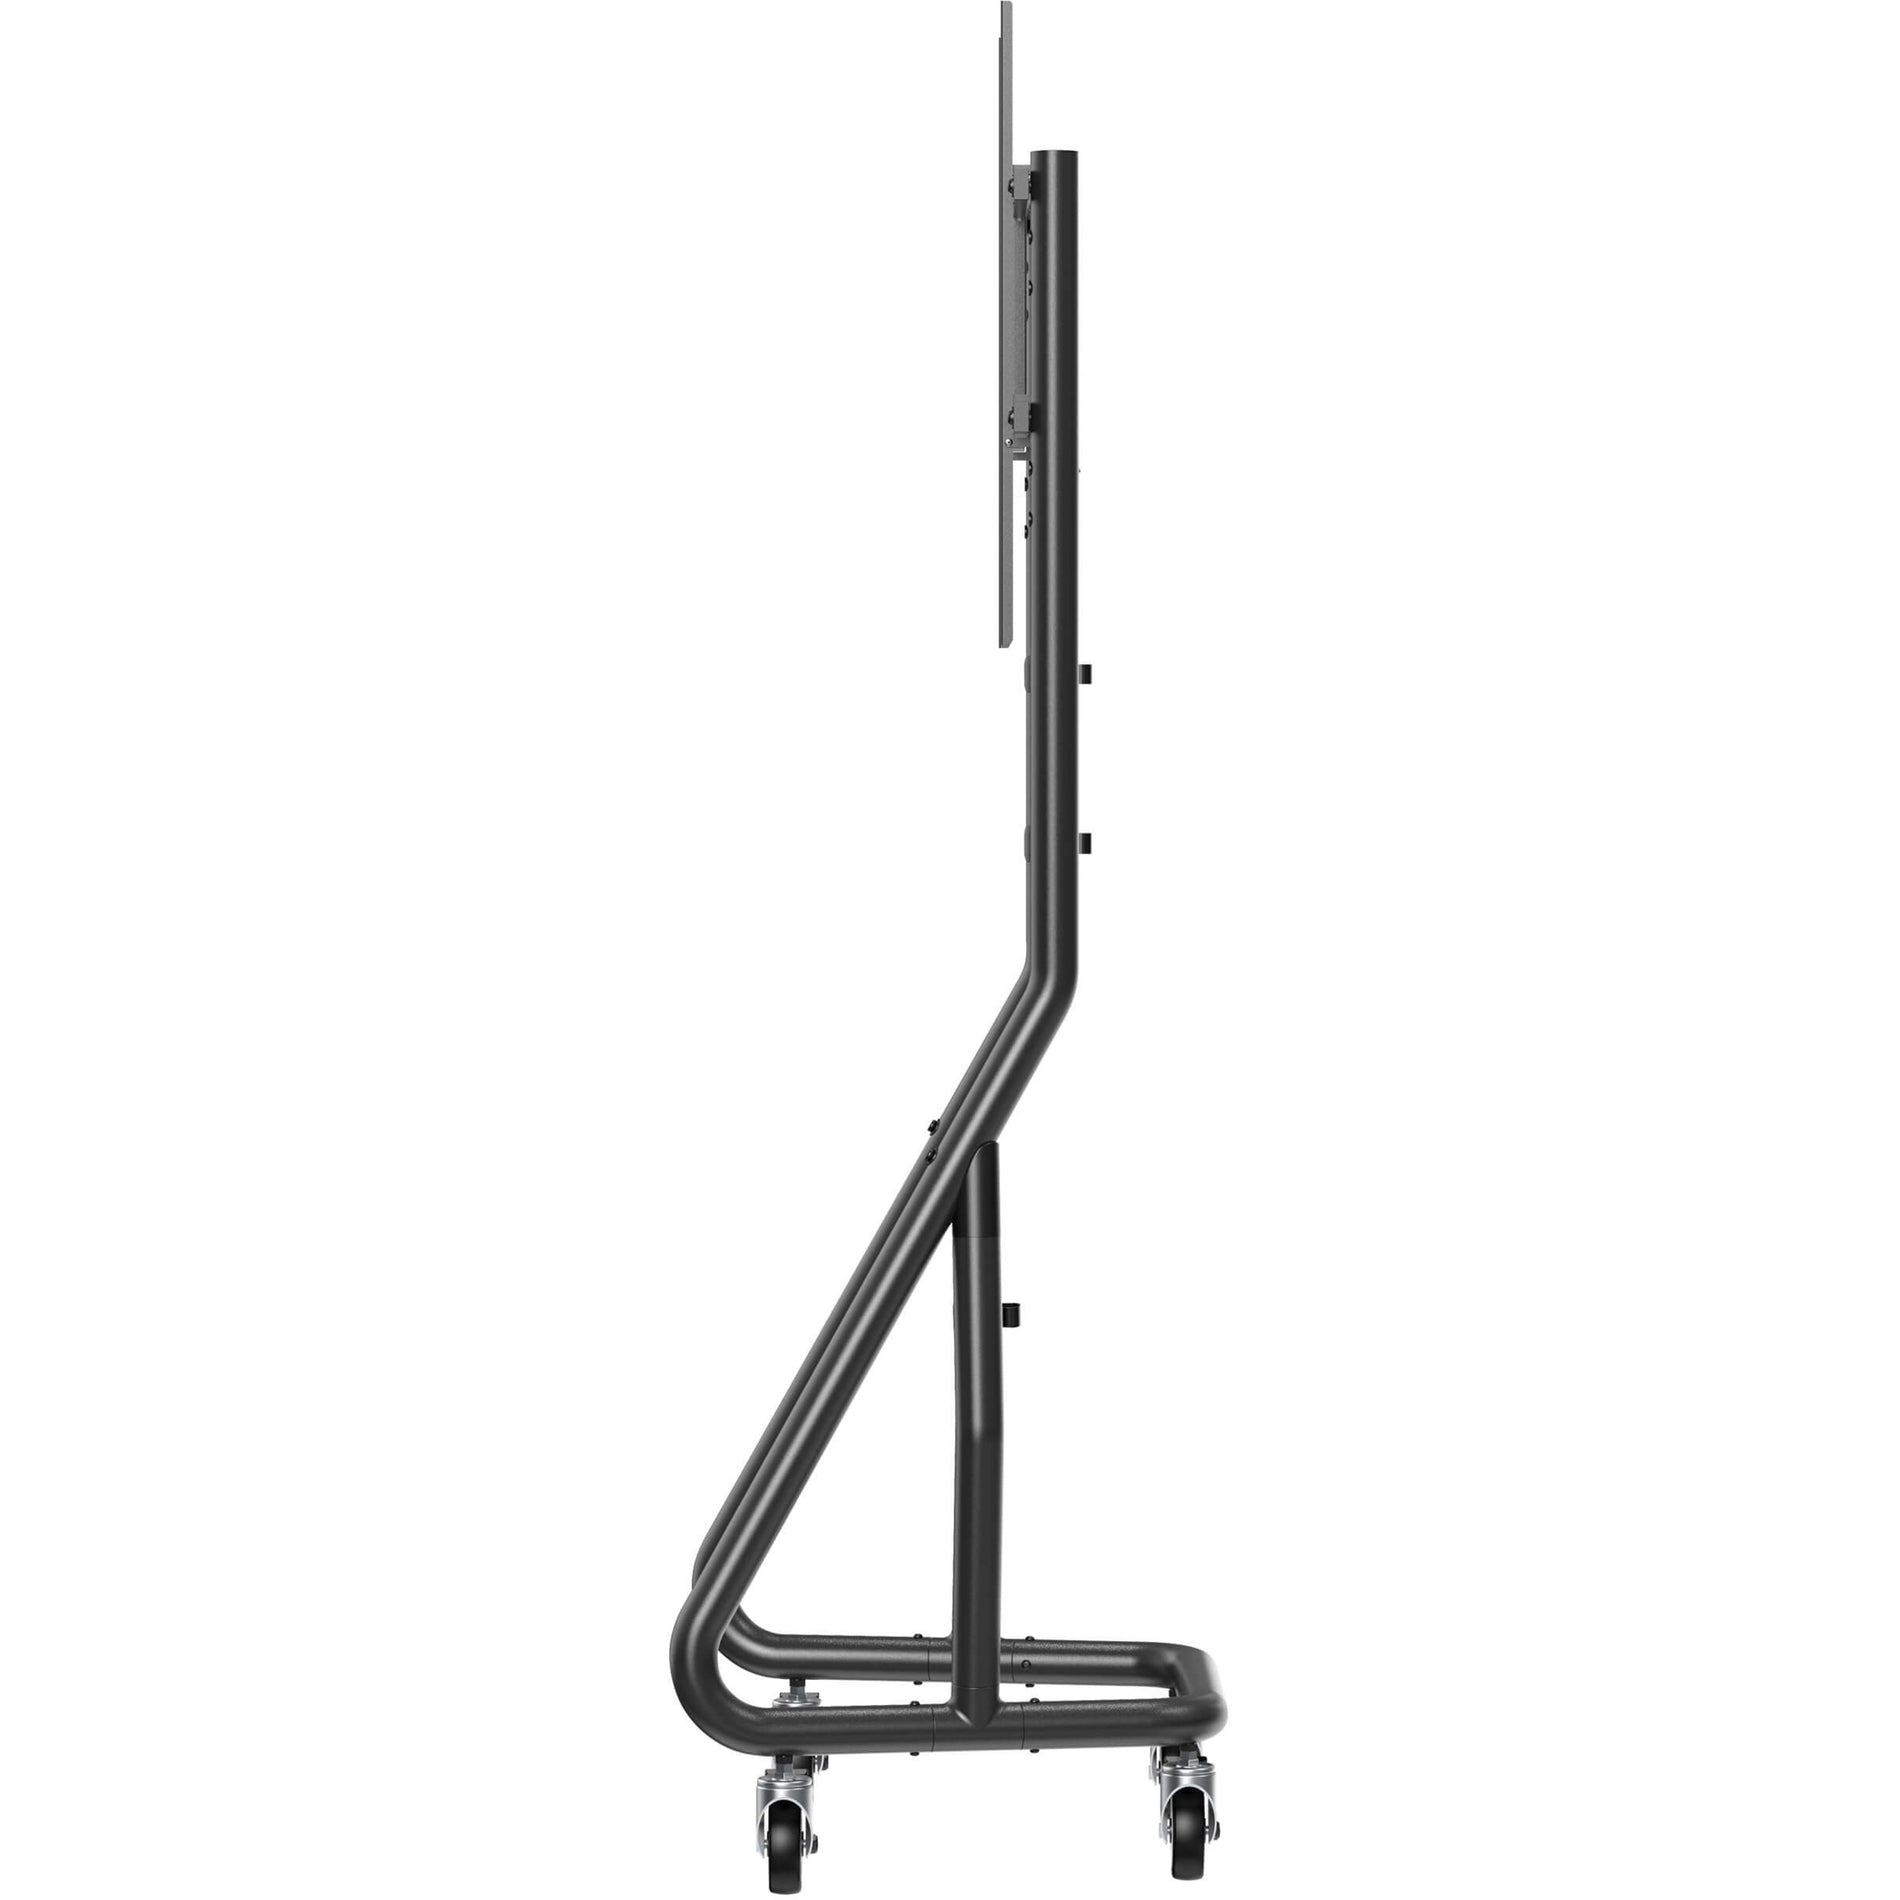 Tripp Lite DMCSP4560HDS Heavy-Duty Streamline Portrait Mobile Cart for 45" to 60" Flat-Panel Displays, Security Lock, Locking Casters, Leveling Feet, Anti-theft, Cable Management